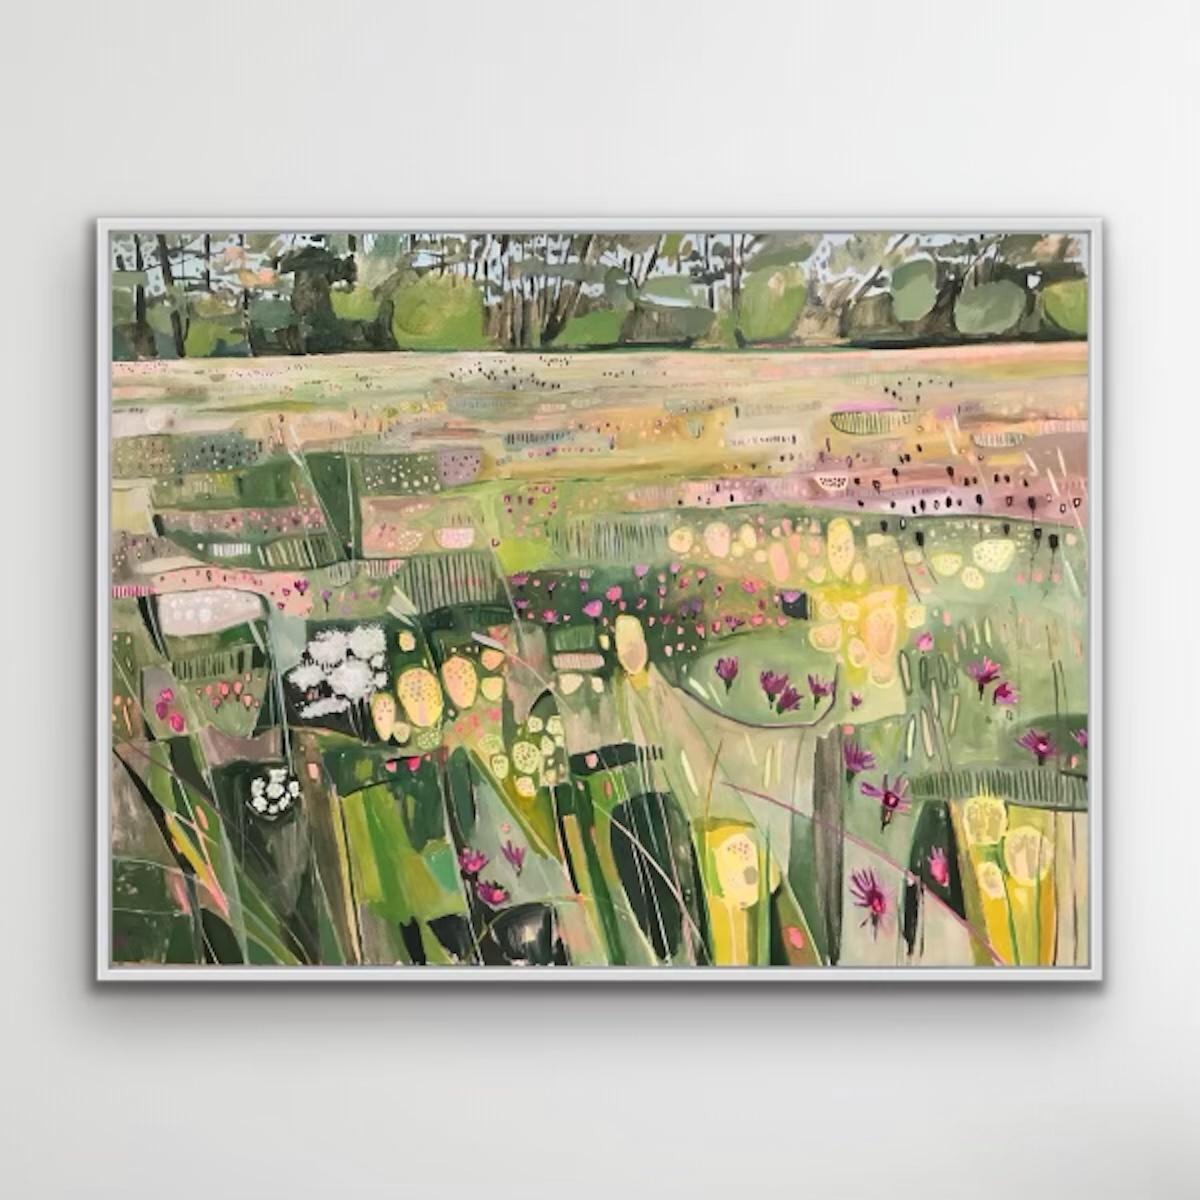 Hinksey Meadow Landscape  - Abstract Expressionist Painting by Elaine Kazimierczuk